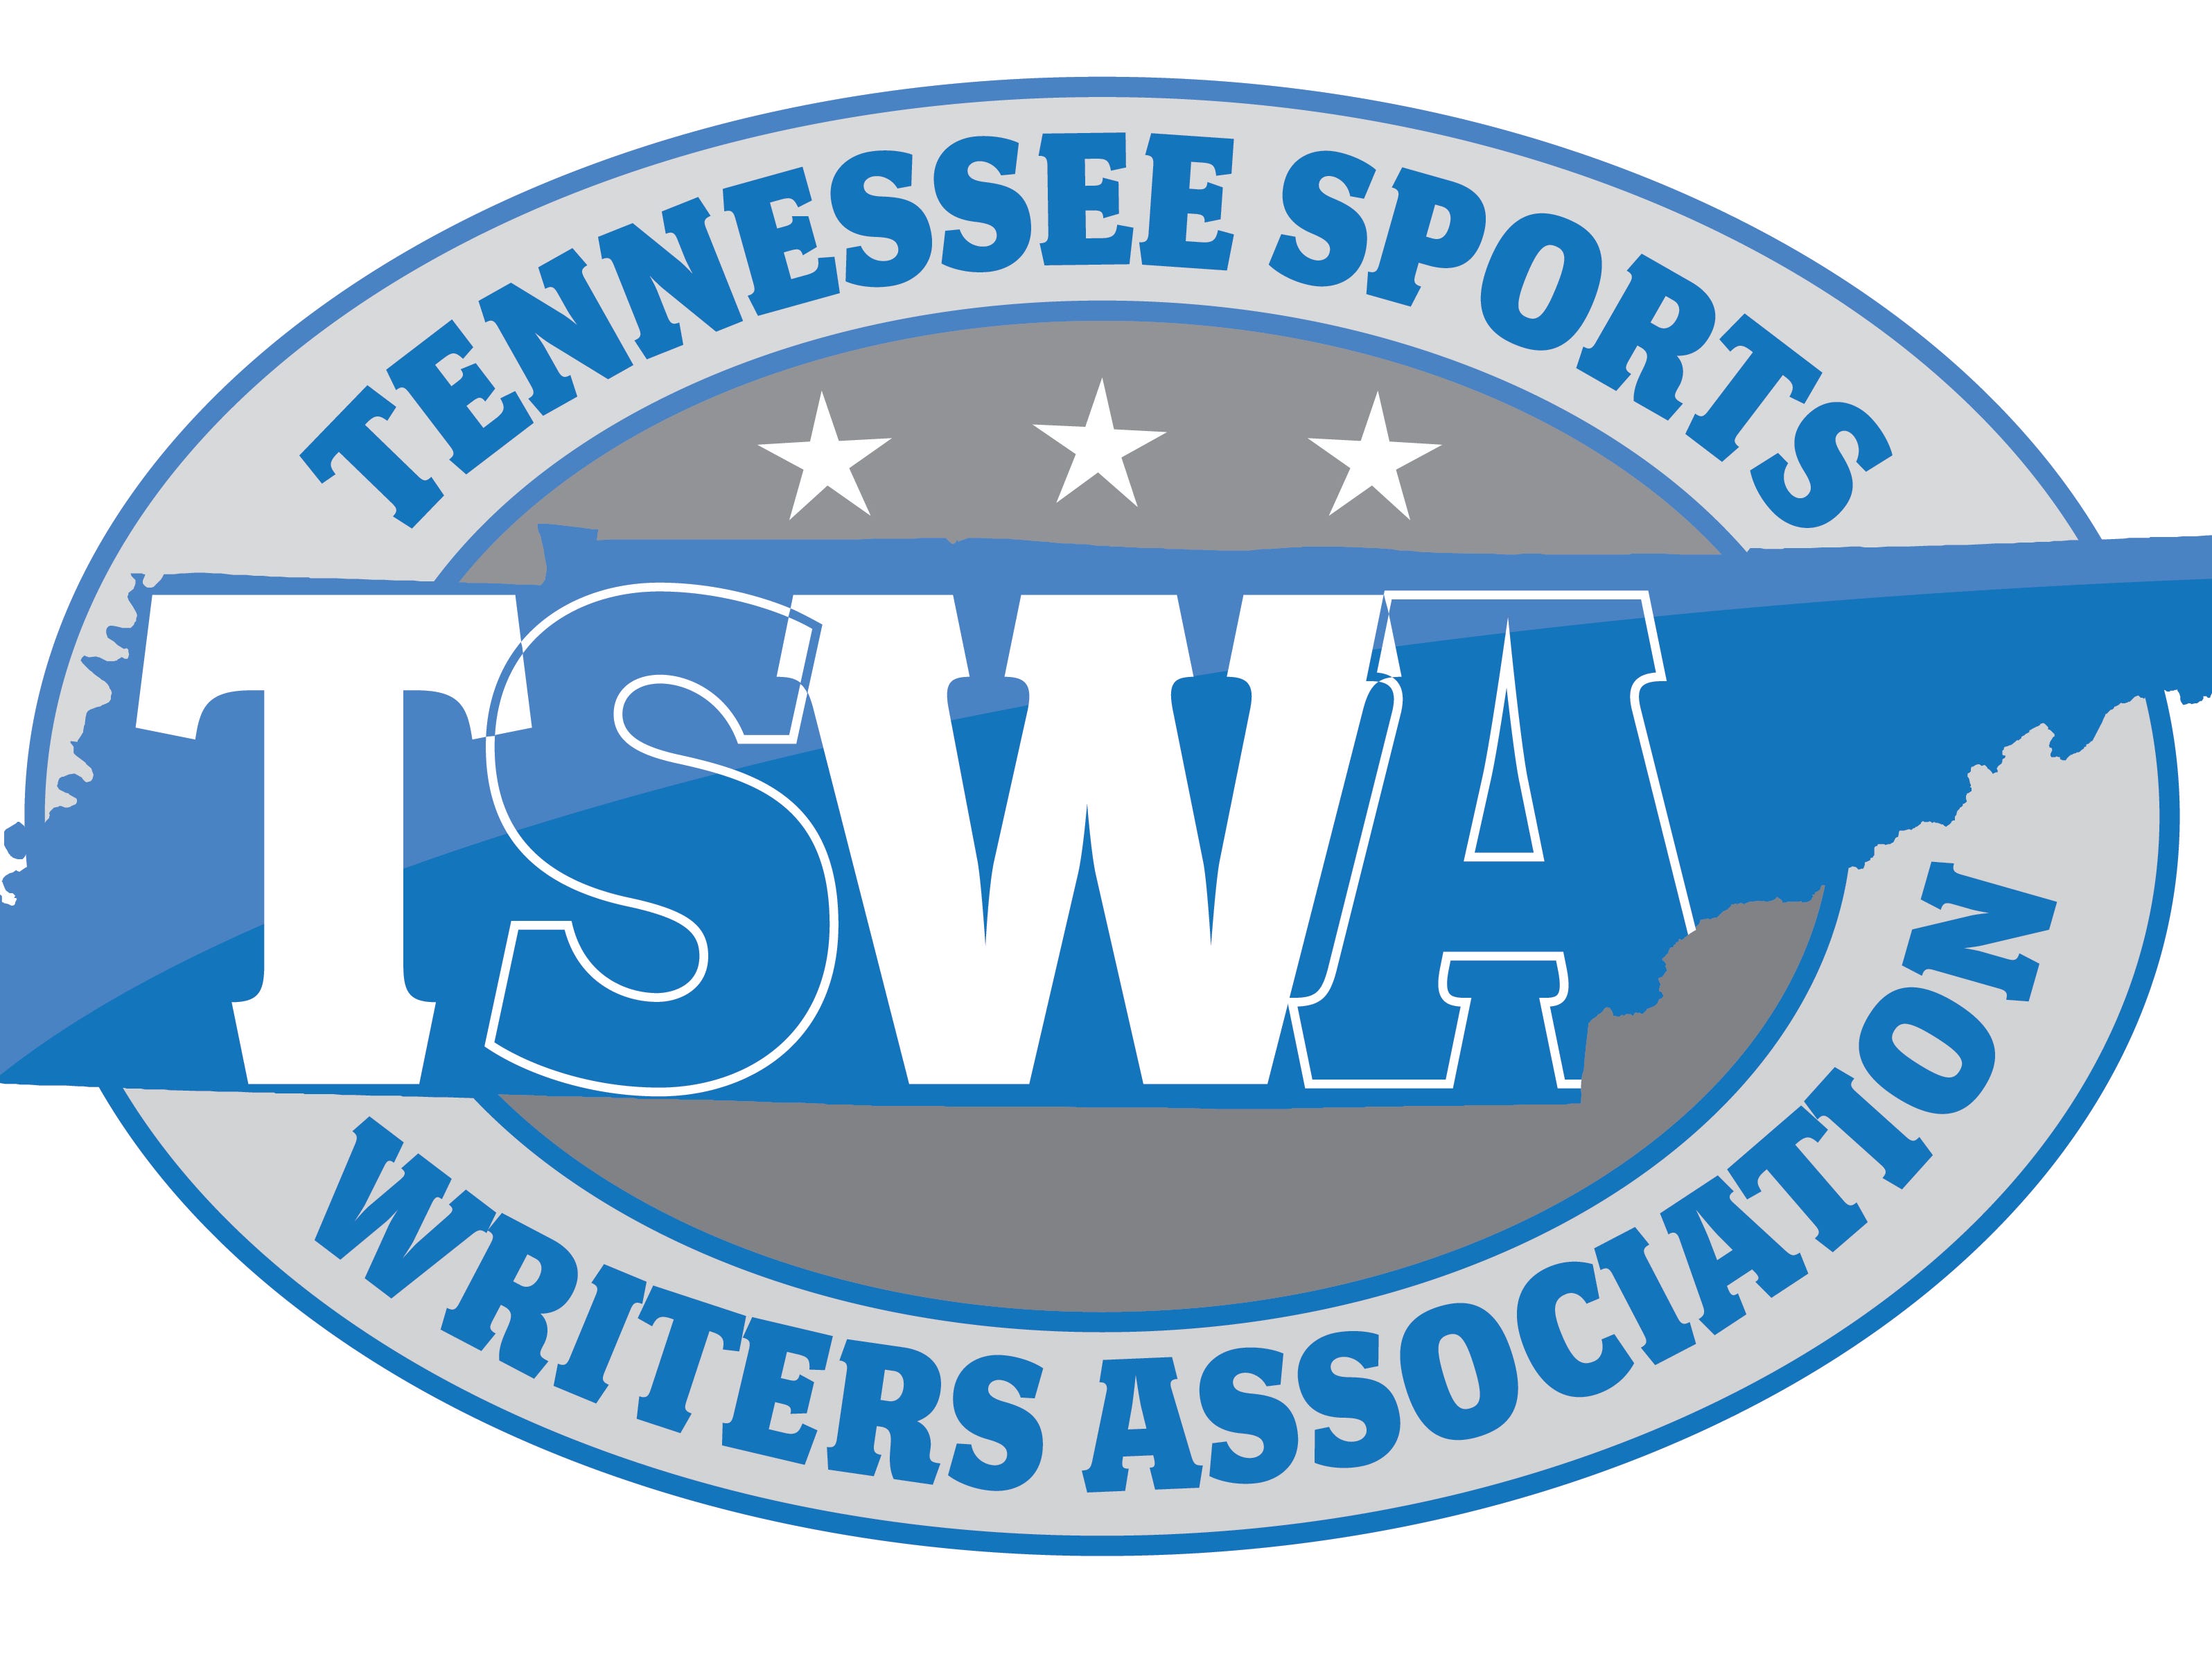 The 2015 TSWA Class 3A and 4A All-State Football teams: